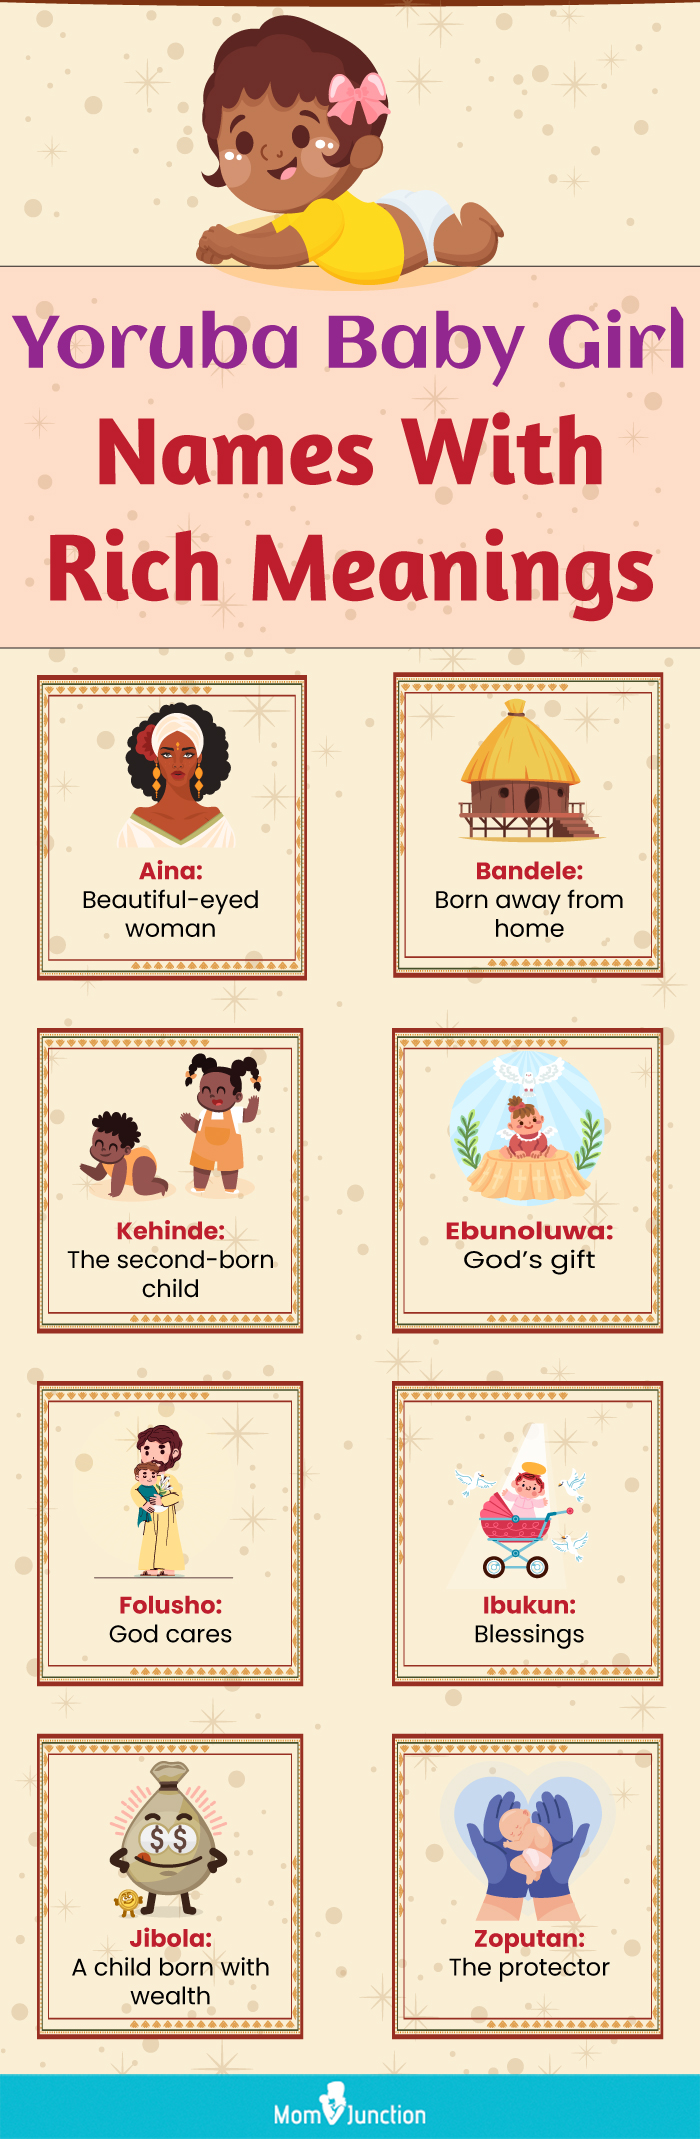 yoruba baby girl names with rich meanings (infographic)